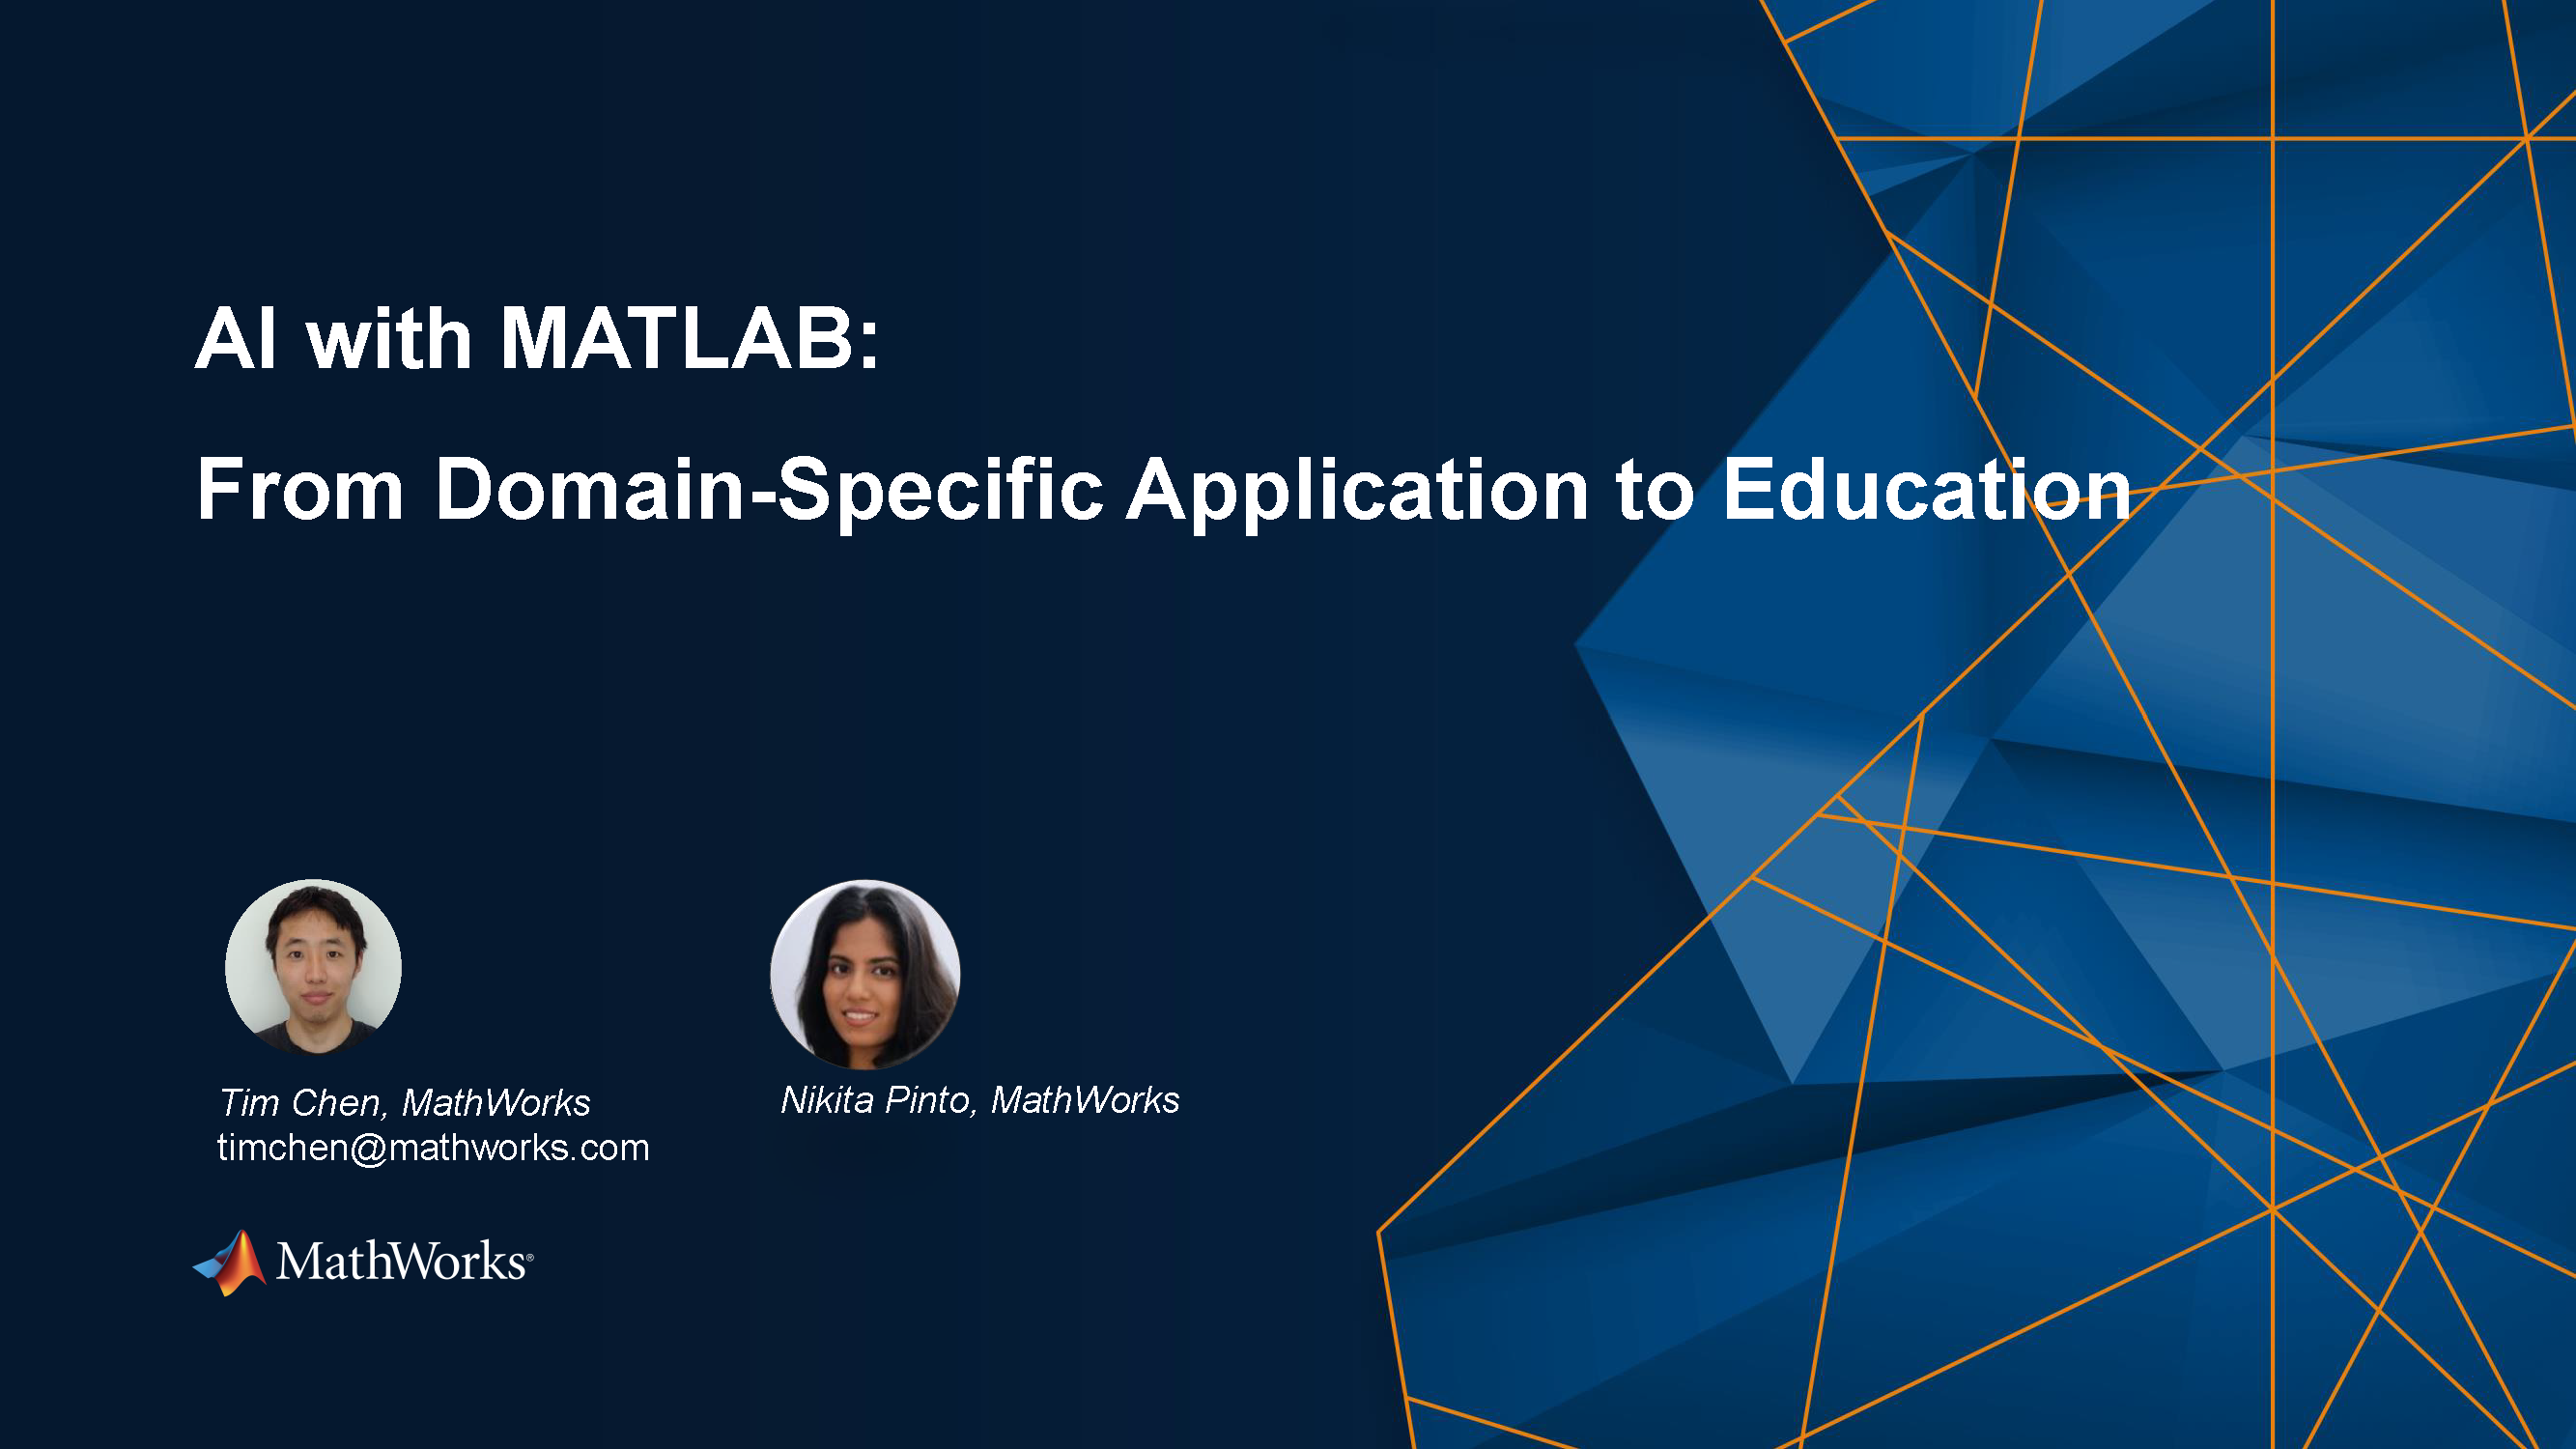 AI with MATLAB: From Domain-Specific Application to Education